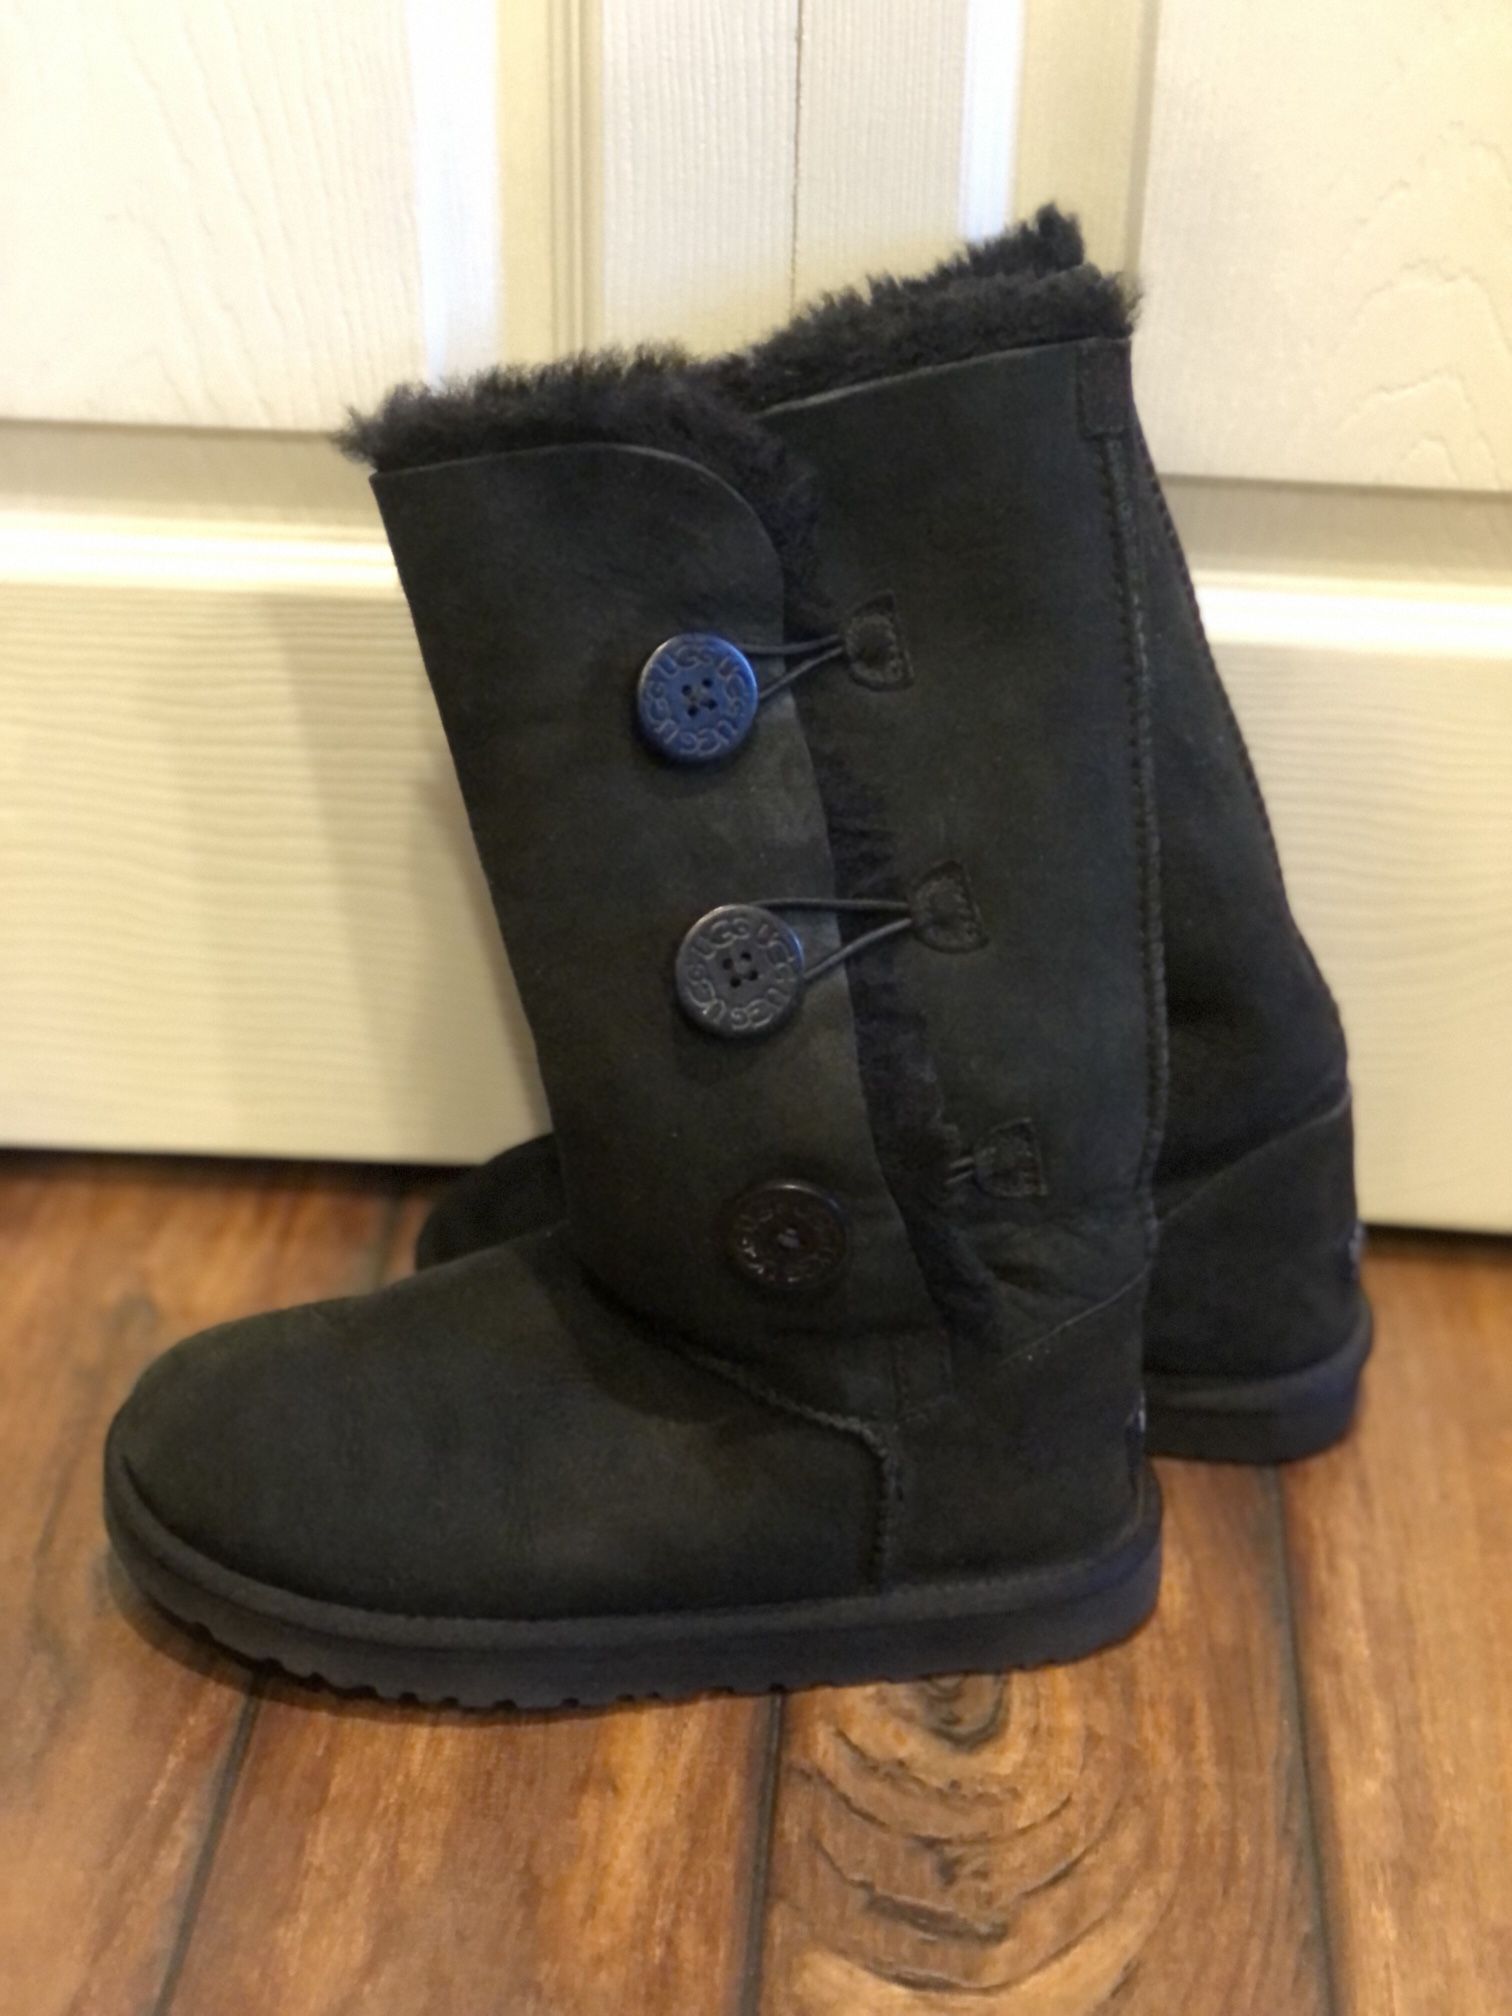 UGG Bailey Button Triplet Tall Black Boots Size 7